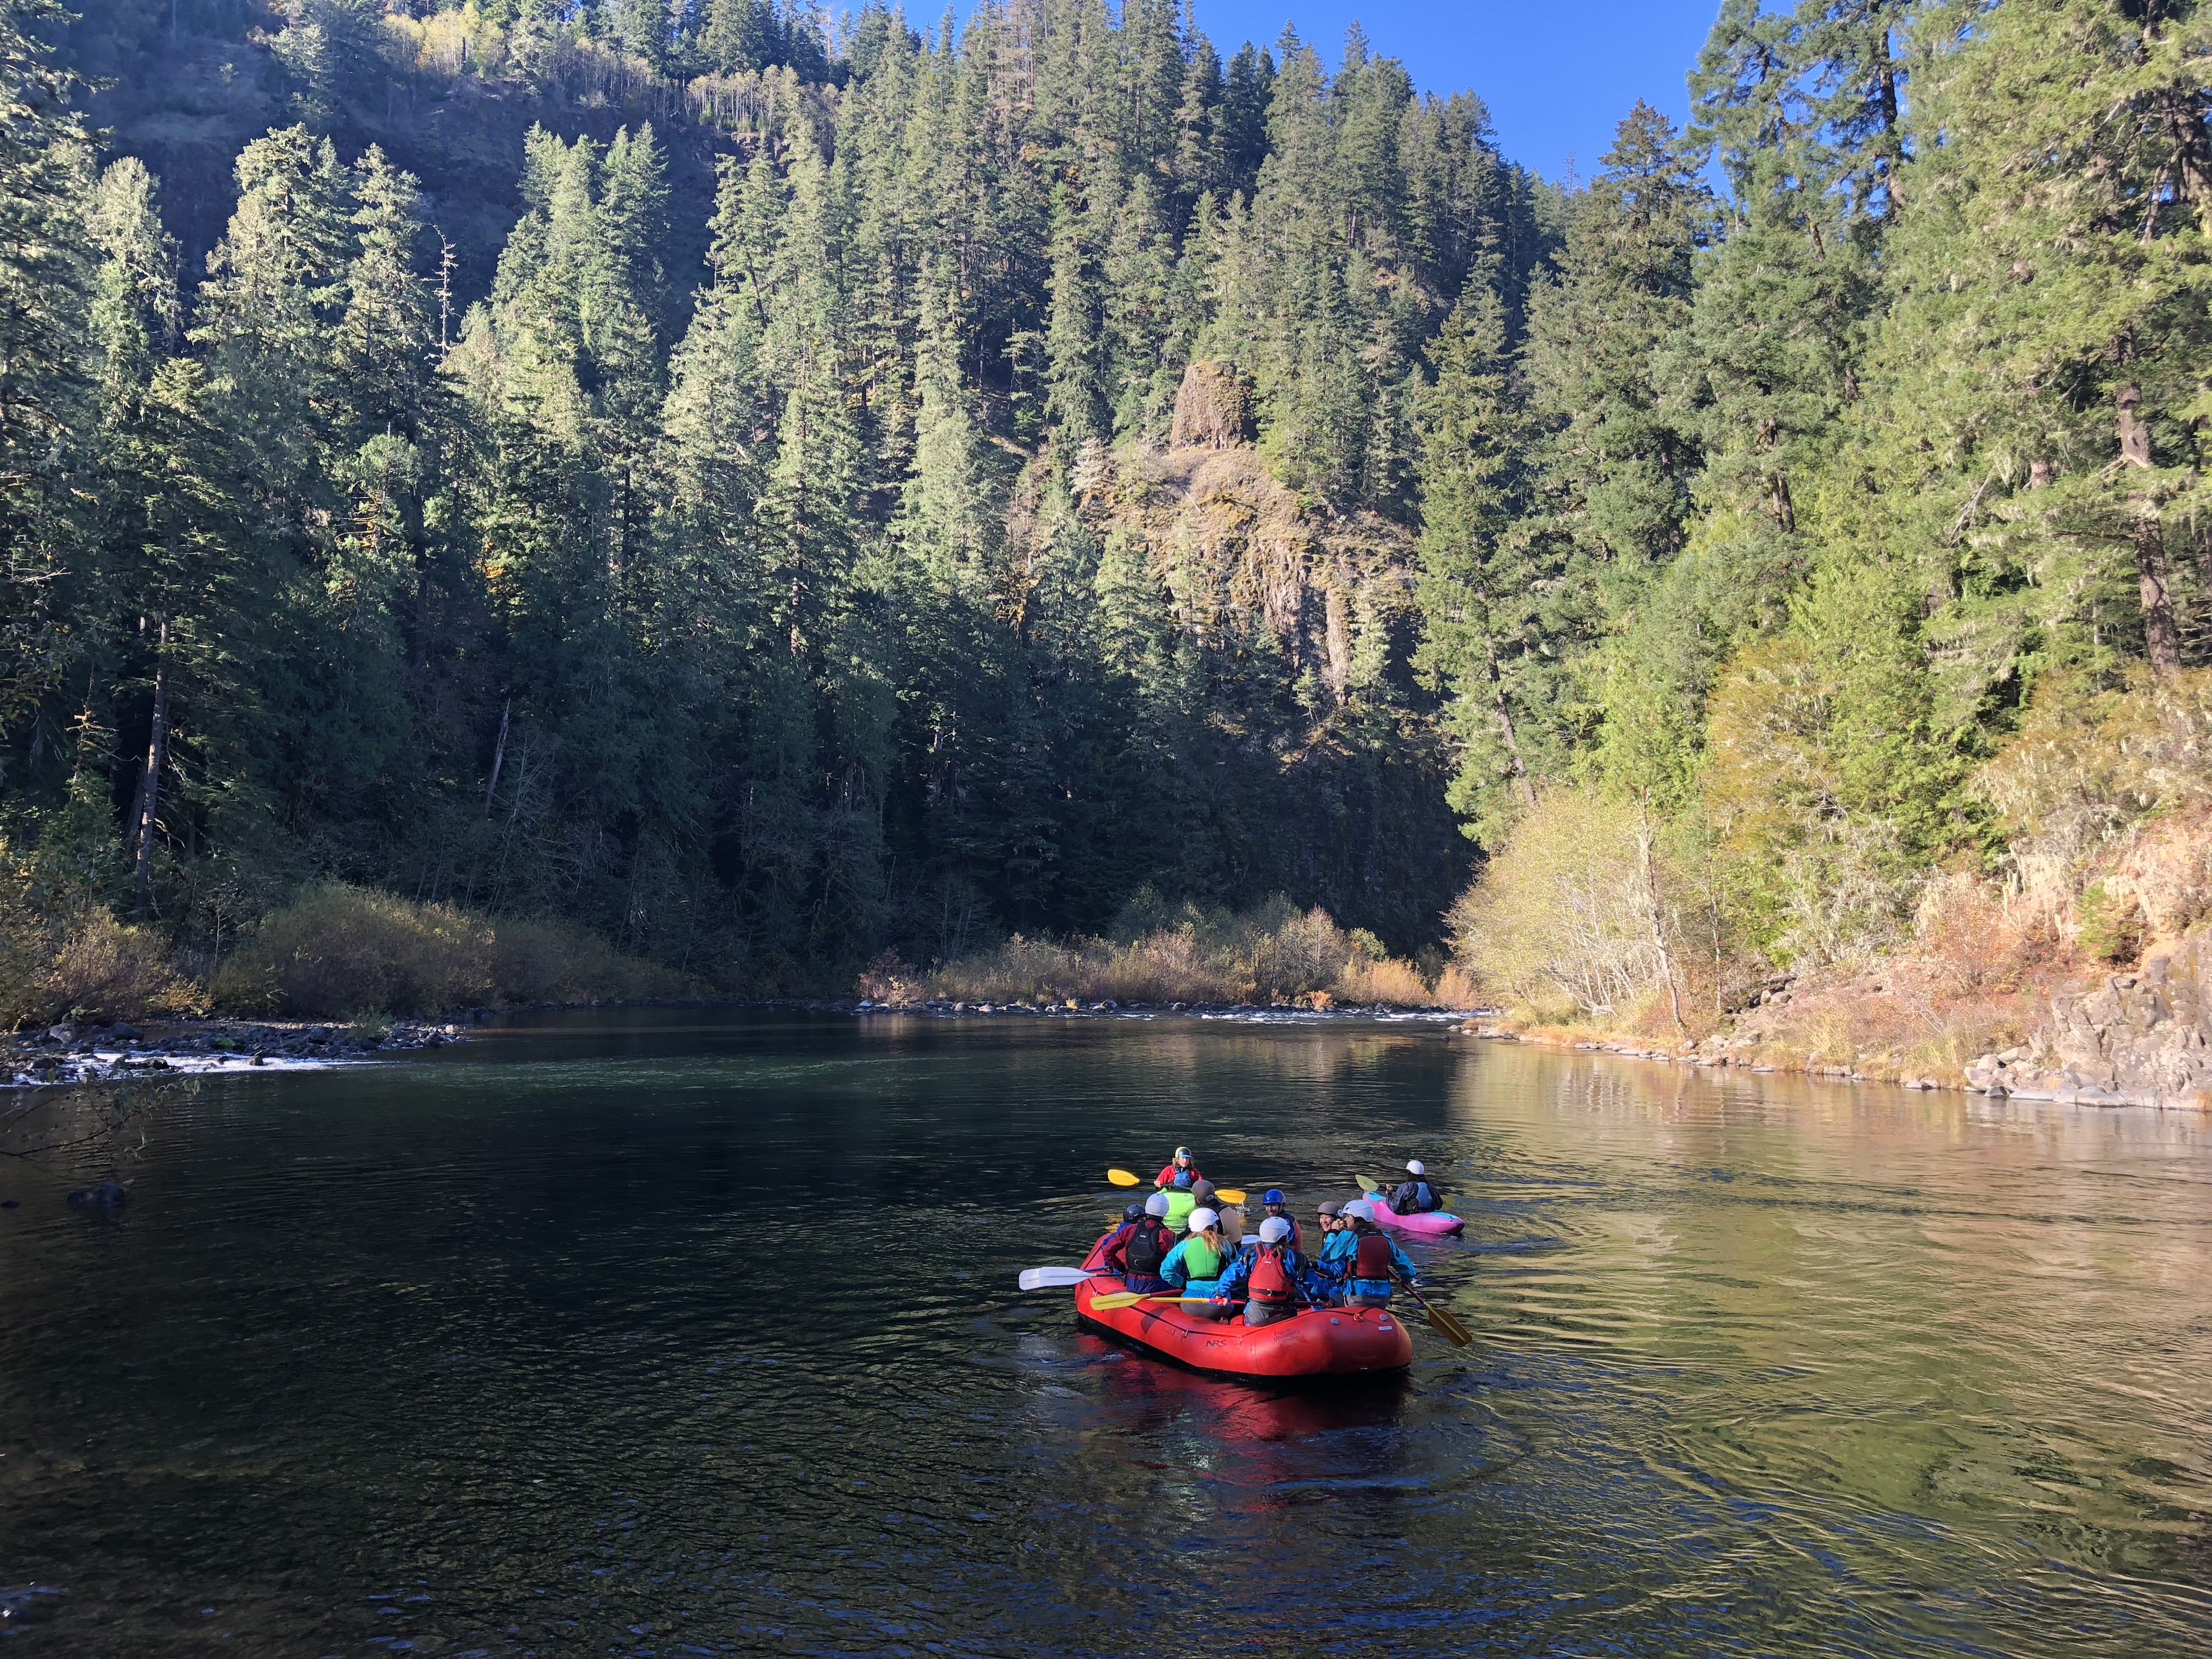 Students with Pacific's Outdoor Pursuits program raft down a river